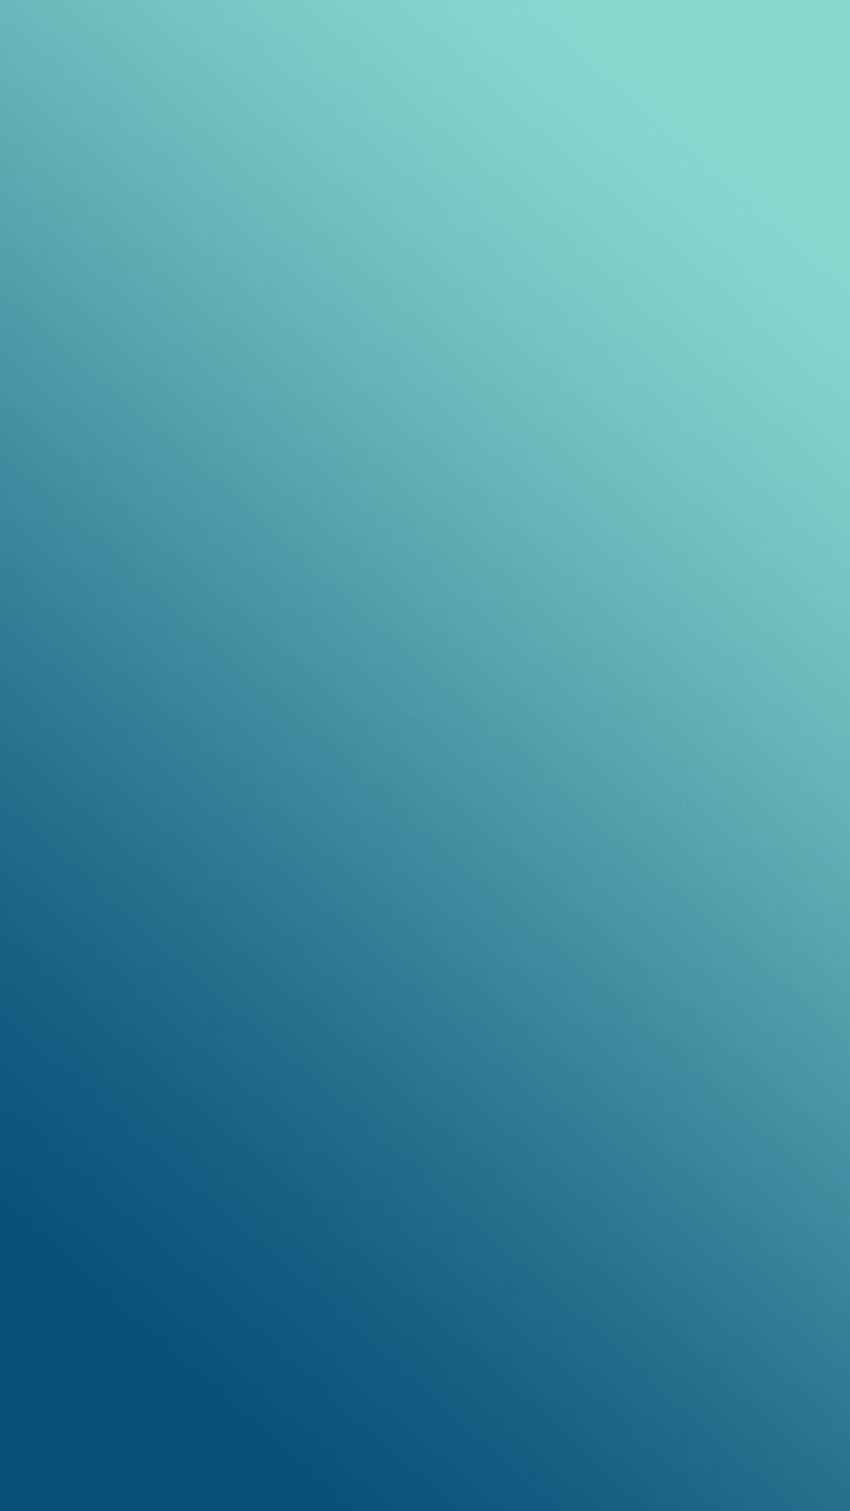 Teal Blue, Turquoise Color HD phone wallpaper